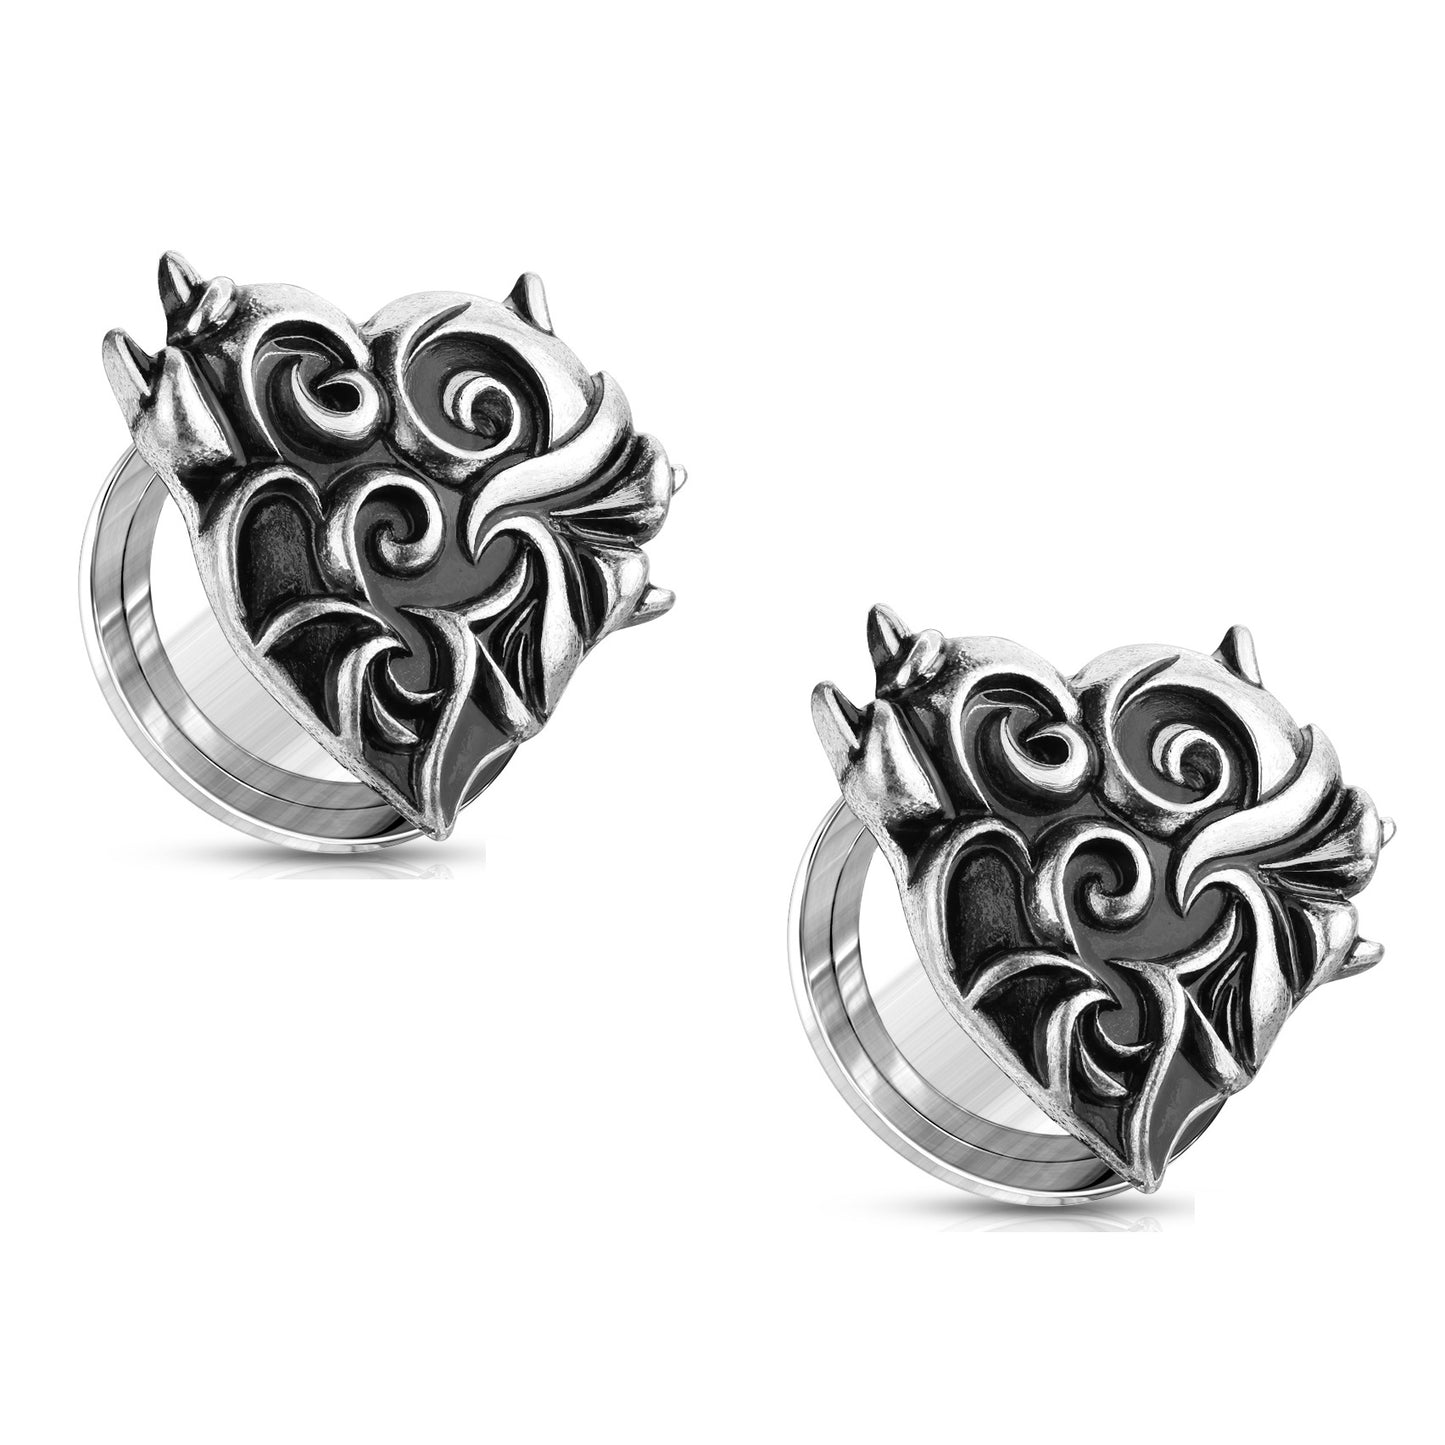 Devil's Swirl Heart Top Screw Fit Flesh Fit Plugs - Antique Silver Plated 316L Stainless Steel - Pair